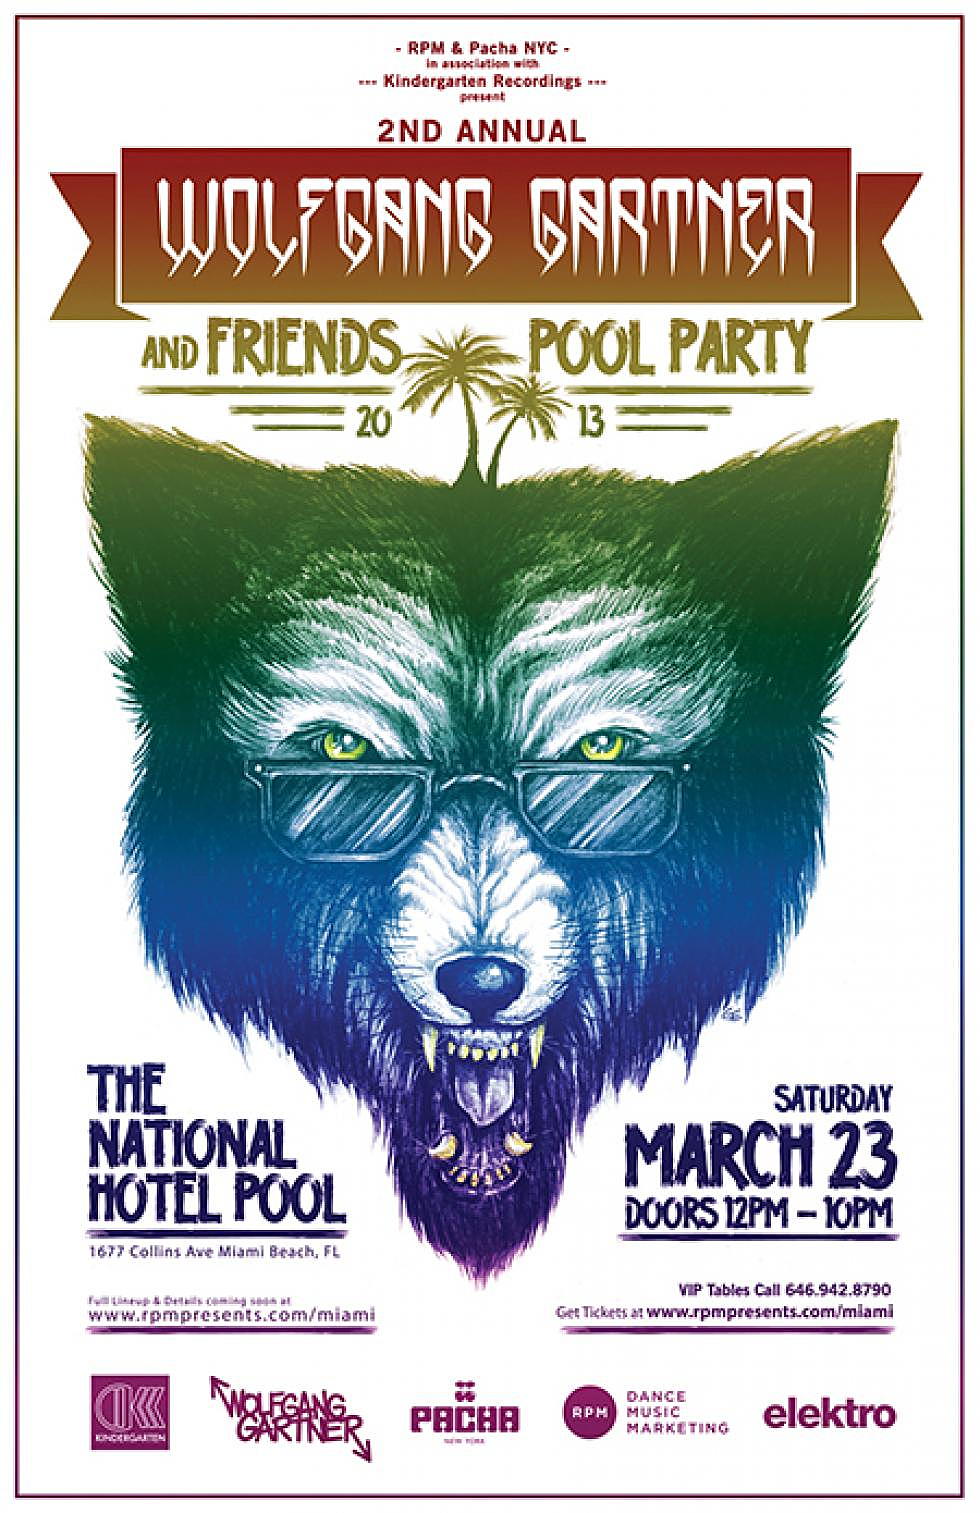 Wolfgang Gartner and Friends Pool party March 23rd at The National Hotel